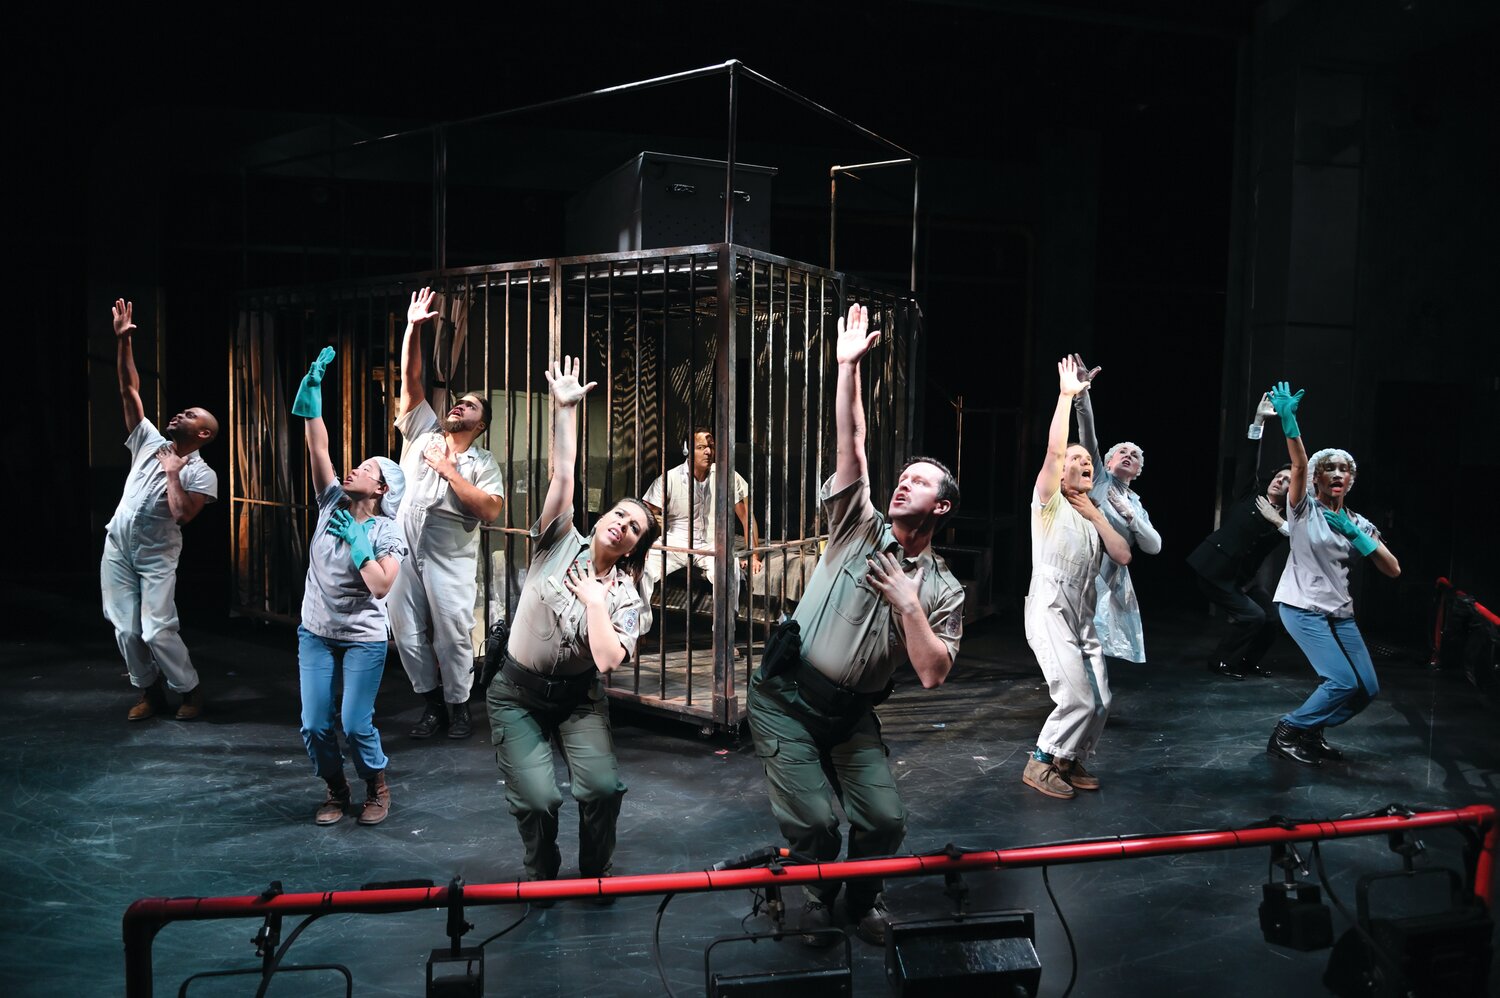 The cast of Sweeney Todd: The Demon Barber of Fleet Street. Music and Lyrics by Stephen Sondheim; Book by Hugh Wheeler; Directed by Curt Columbus; Music Direction by Andrew Smithson; Orchestrations by Peter Leigh-Nilsen, Choreography by Sharon Jenkins; Fight Choreography by Mark A. Rose; Set Design by Eugene Lee and Patrick Lynch; Costume Design by Shahrzad Mazaheri; Lighting Design by Dawn Chiang; Sound Design by Peter Sasha Hurowitz.